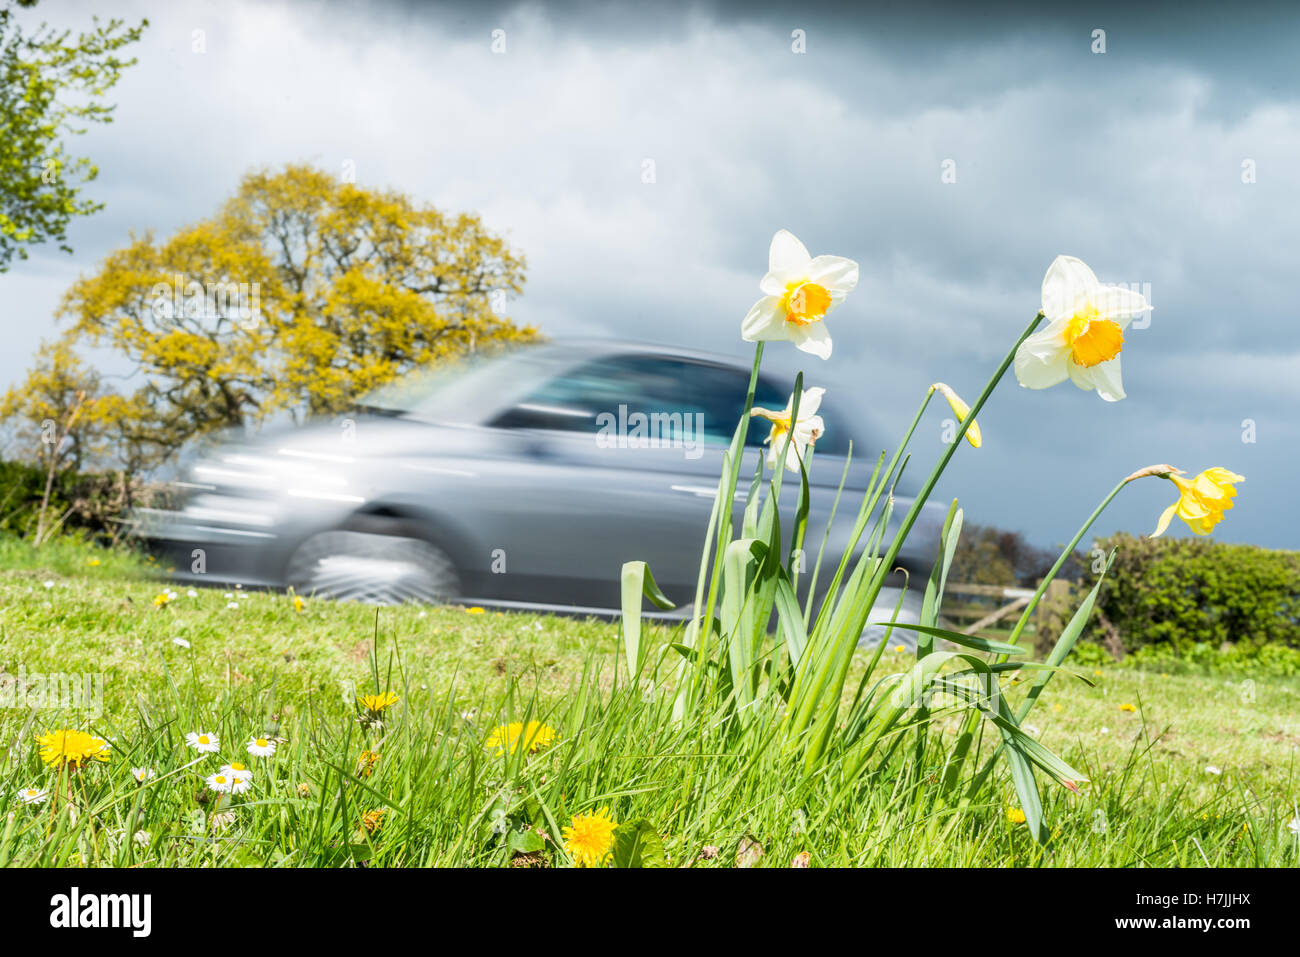 A speeding car in the English countryside Stock Photo